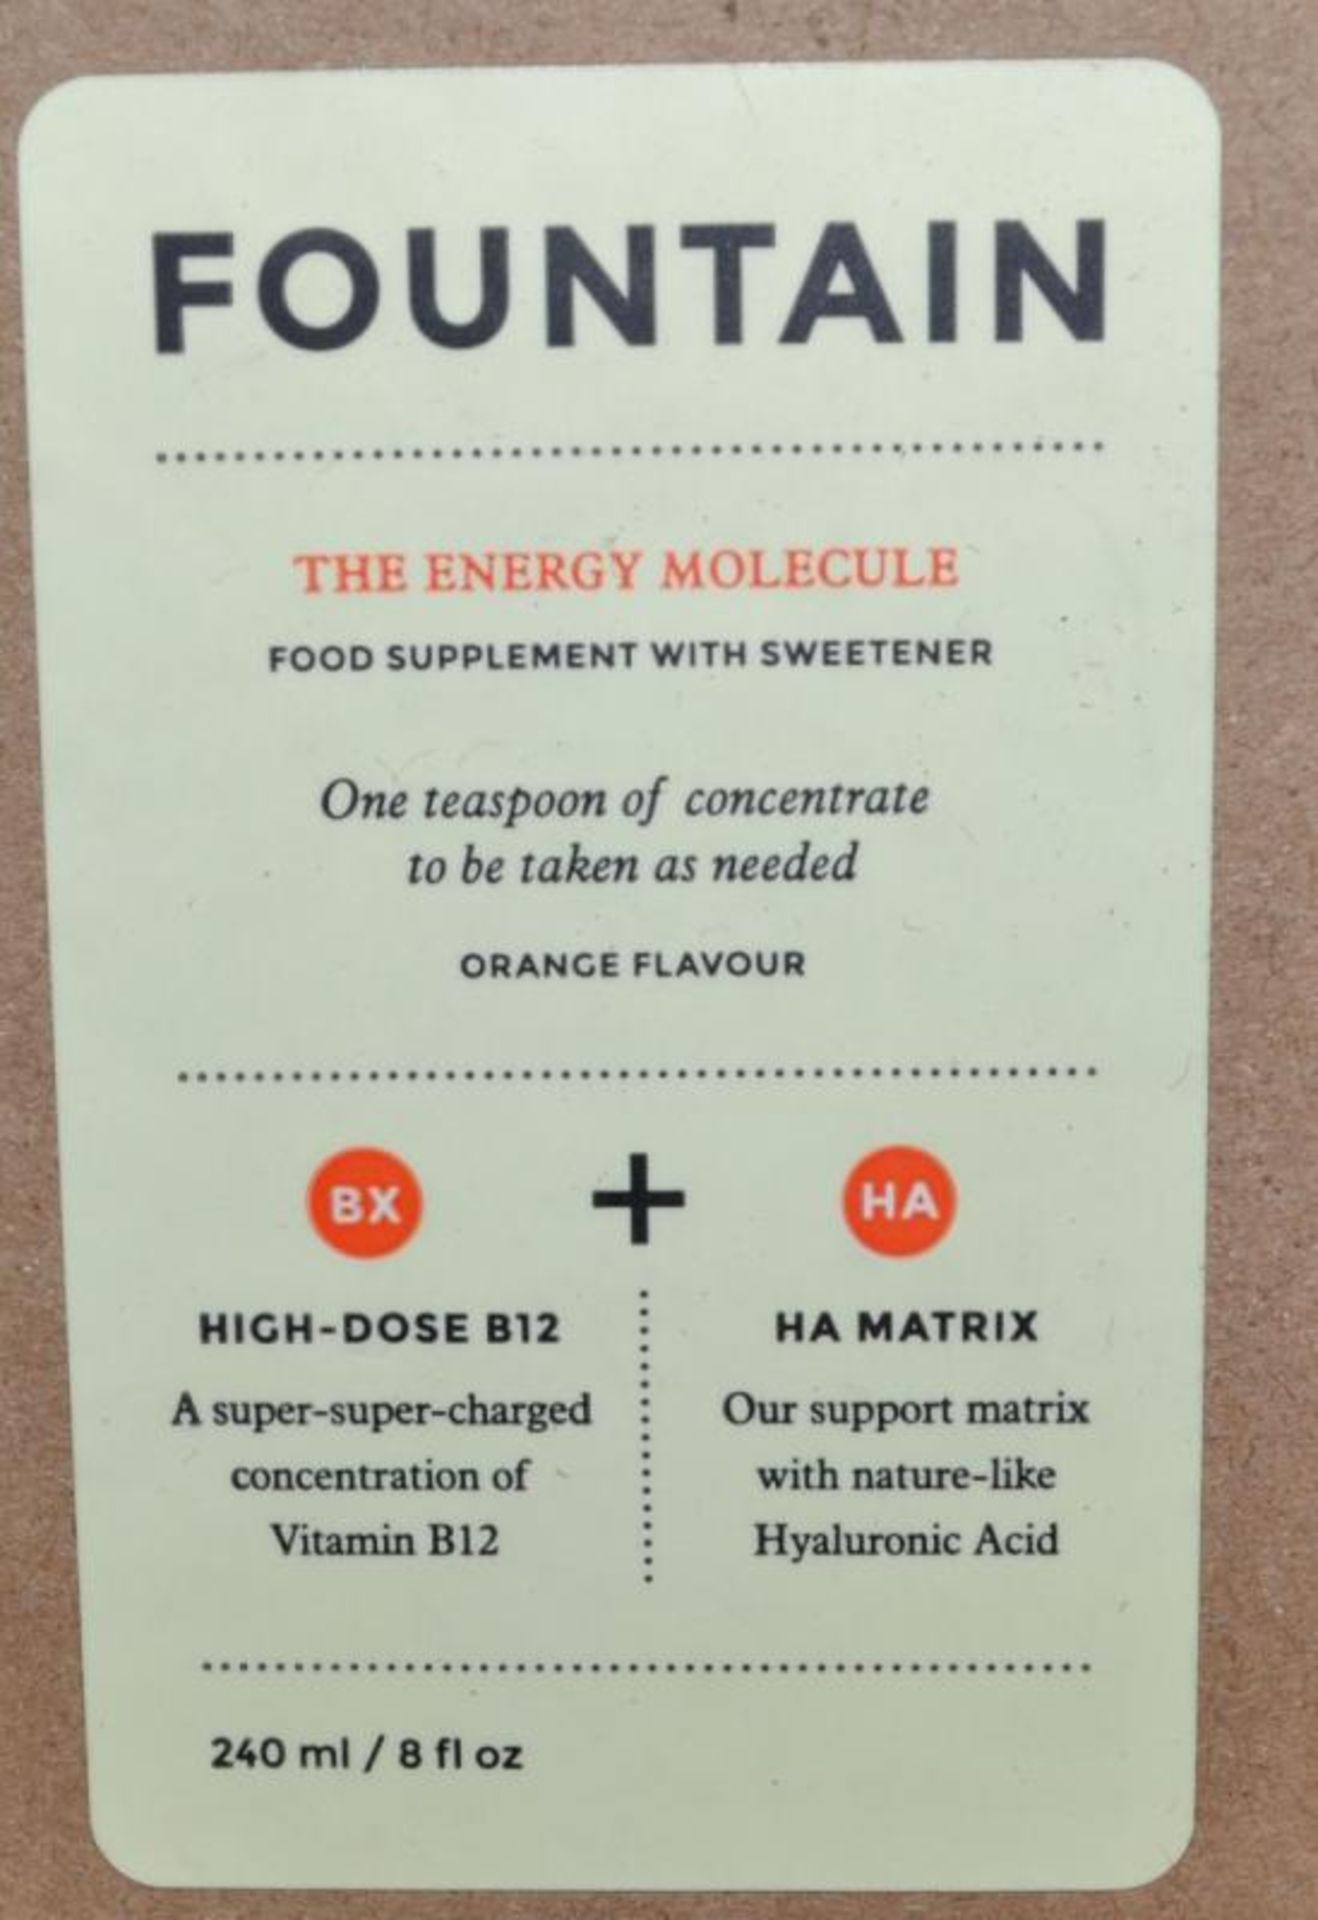 10 x 240ml Bottles of Fountain, The Energy Molecule Supplement - New & Boxed - CL185 - Ref: - Image 6 of 7